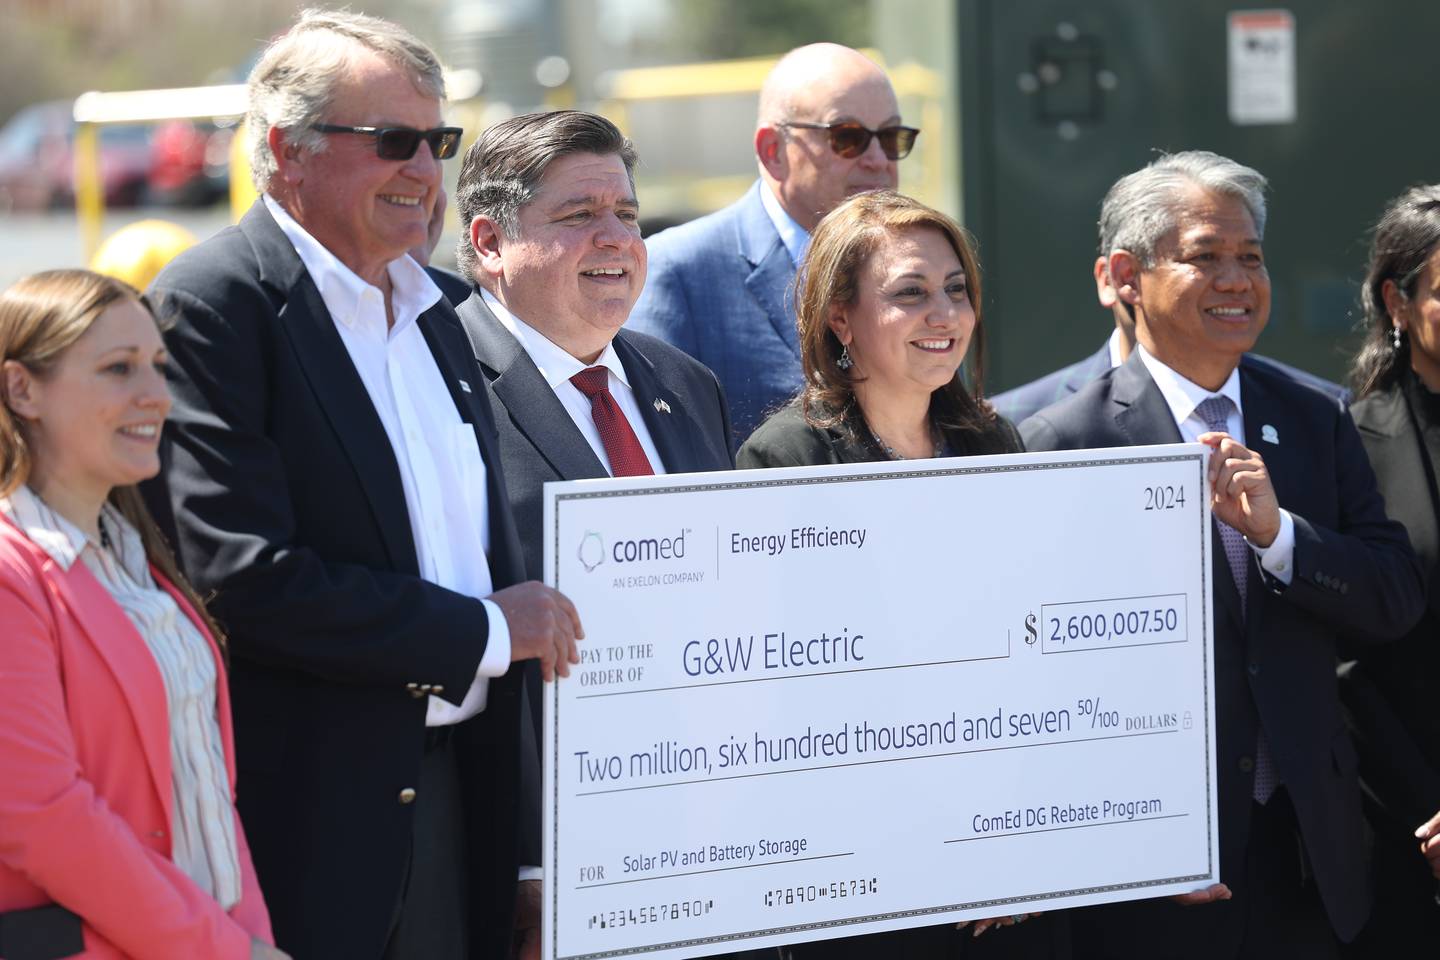 John Mueller, chairman, and owner of G&W Electric, and Gov. J.B. Pritzker, and others attend an event outside the G&W Electric building in Bolingbrook.